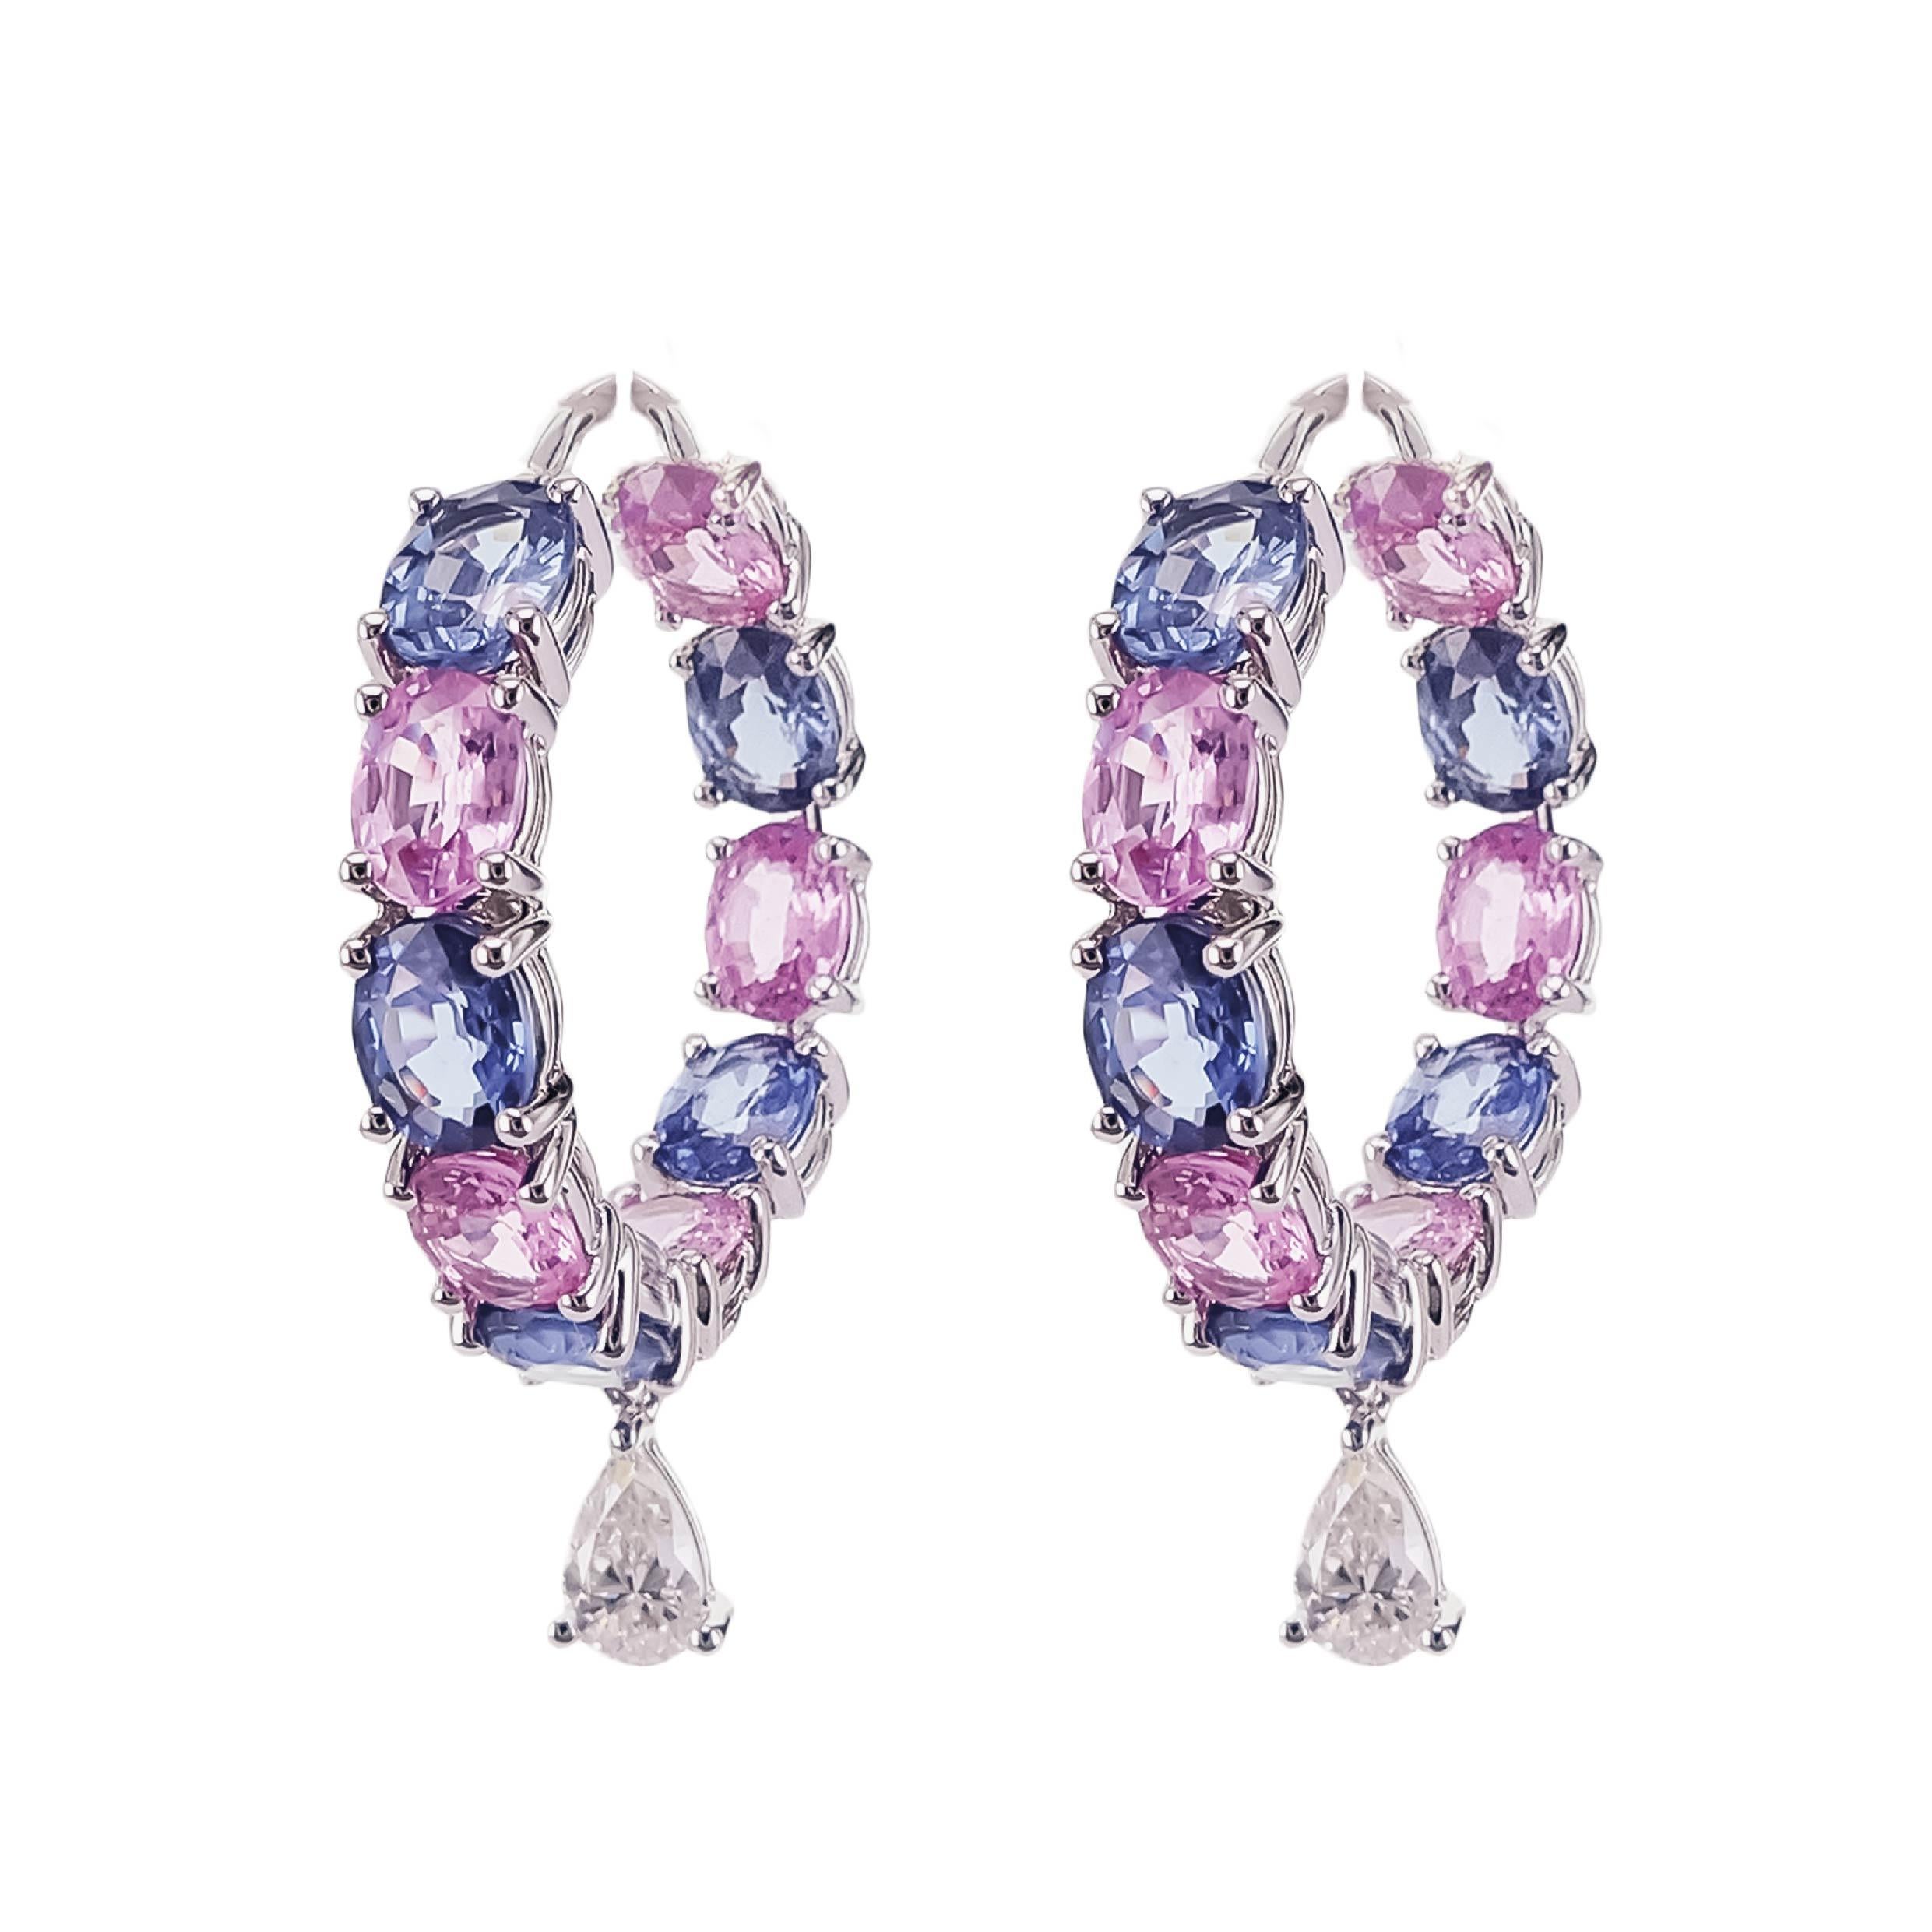 A lovely combination of blue and pink sapphire set along with white pear shape brilliant diamond brings this hoop design to life. A total of 8.43 carats of sapphire are set along with 0.48 carats of white pear shape diamond. What sets the design